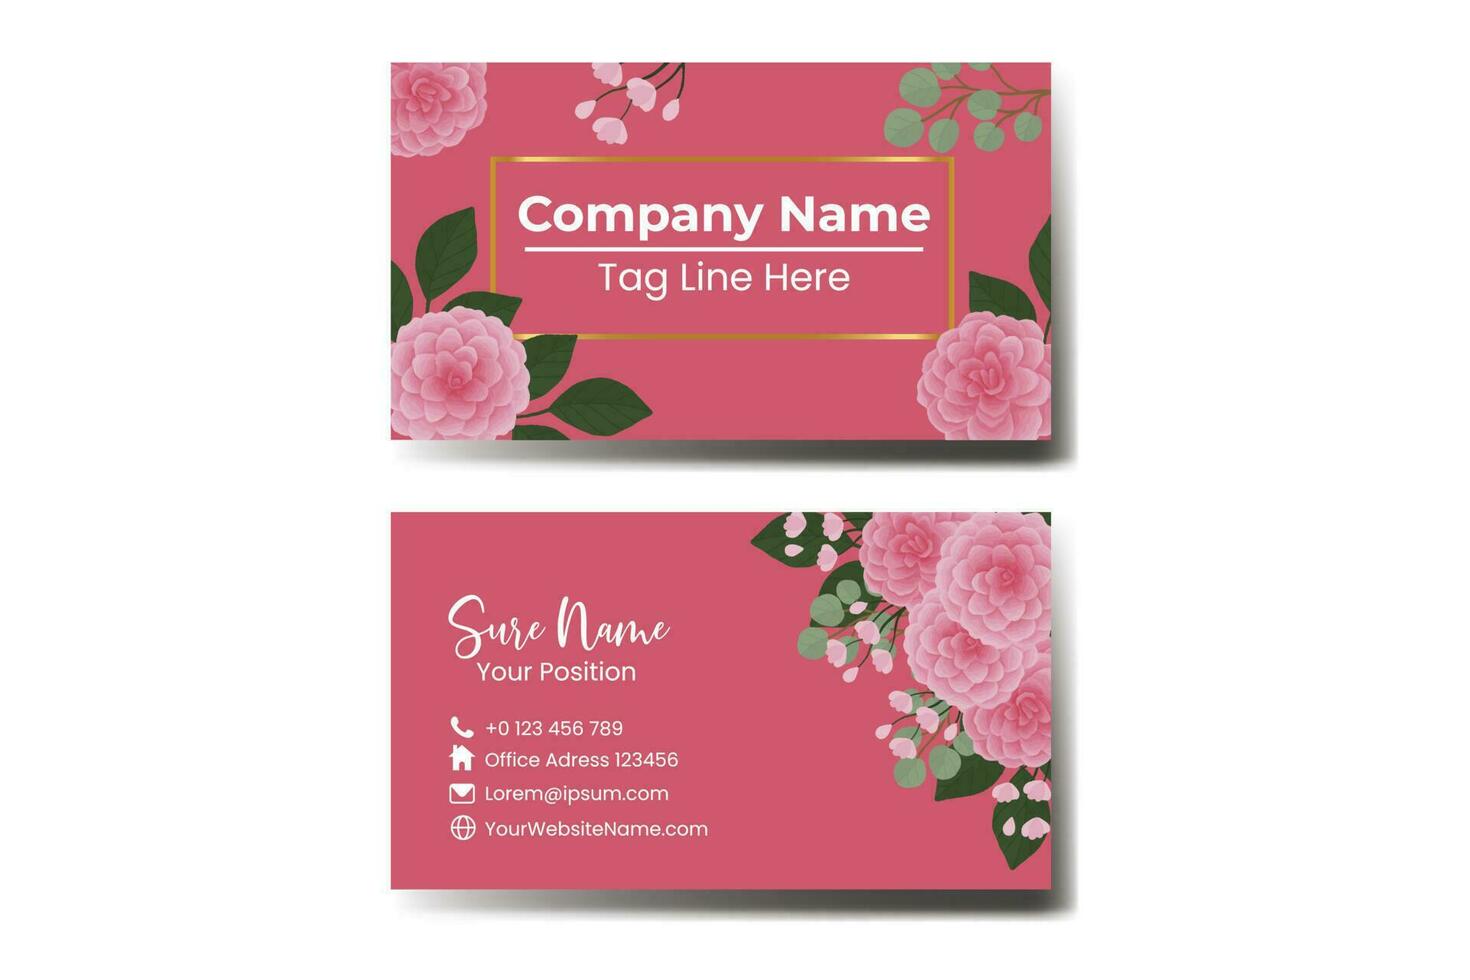 Business Card Template Pink Dahlia Flower .Double-sided Pink Colors. Flat Design Vector Illustration. Stationery Design